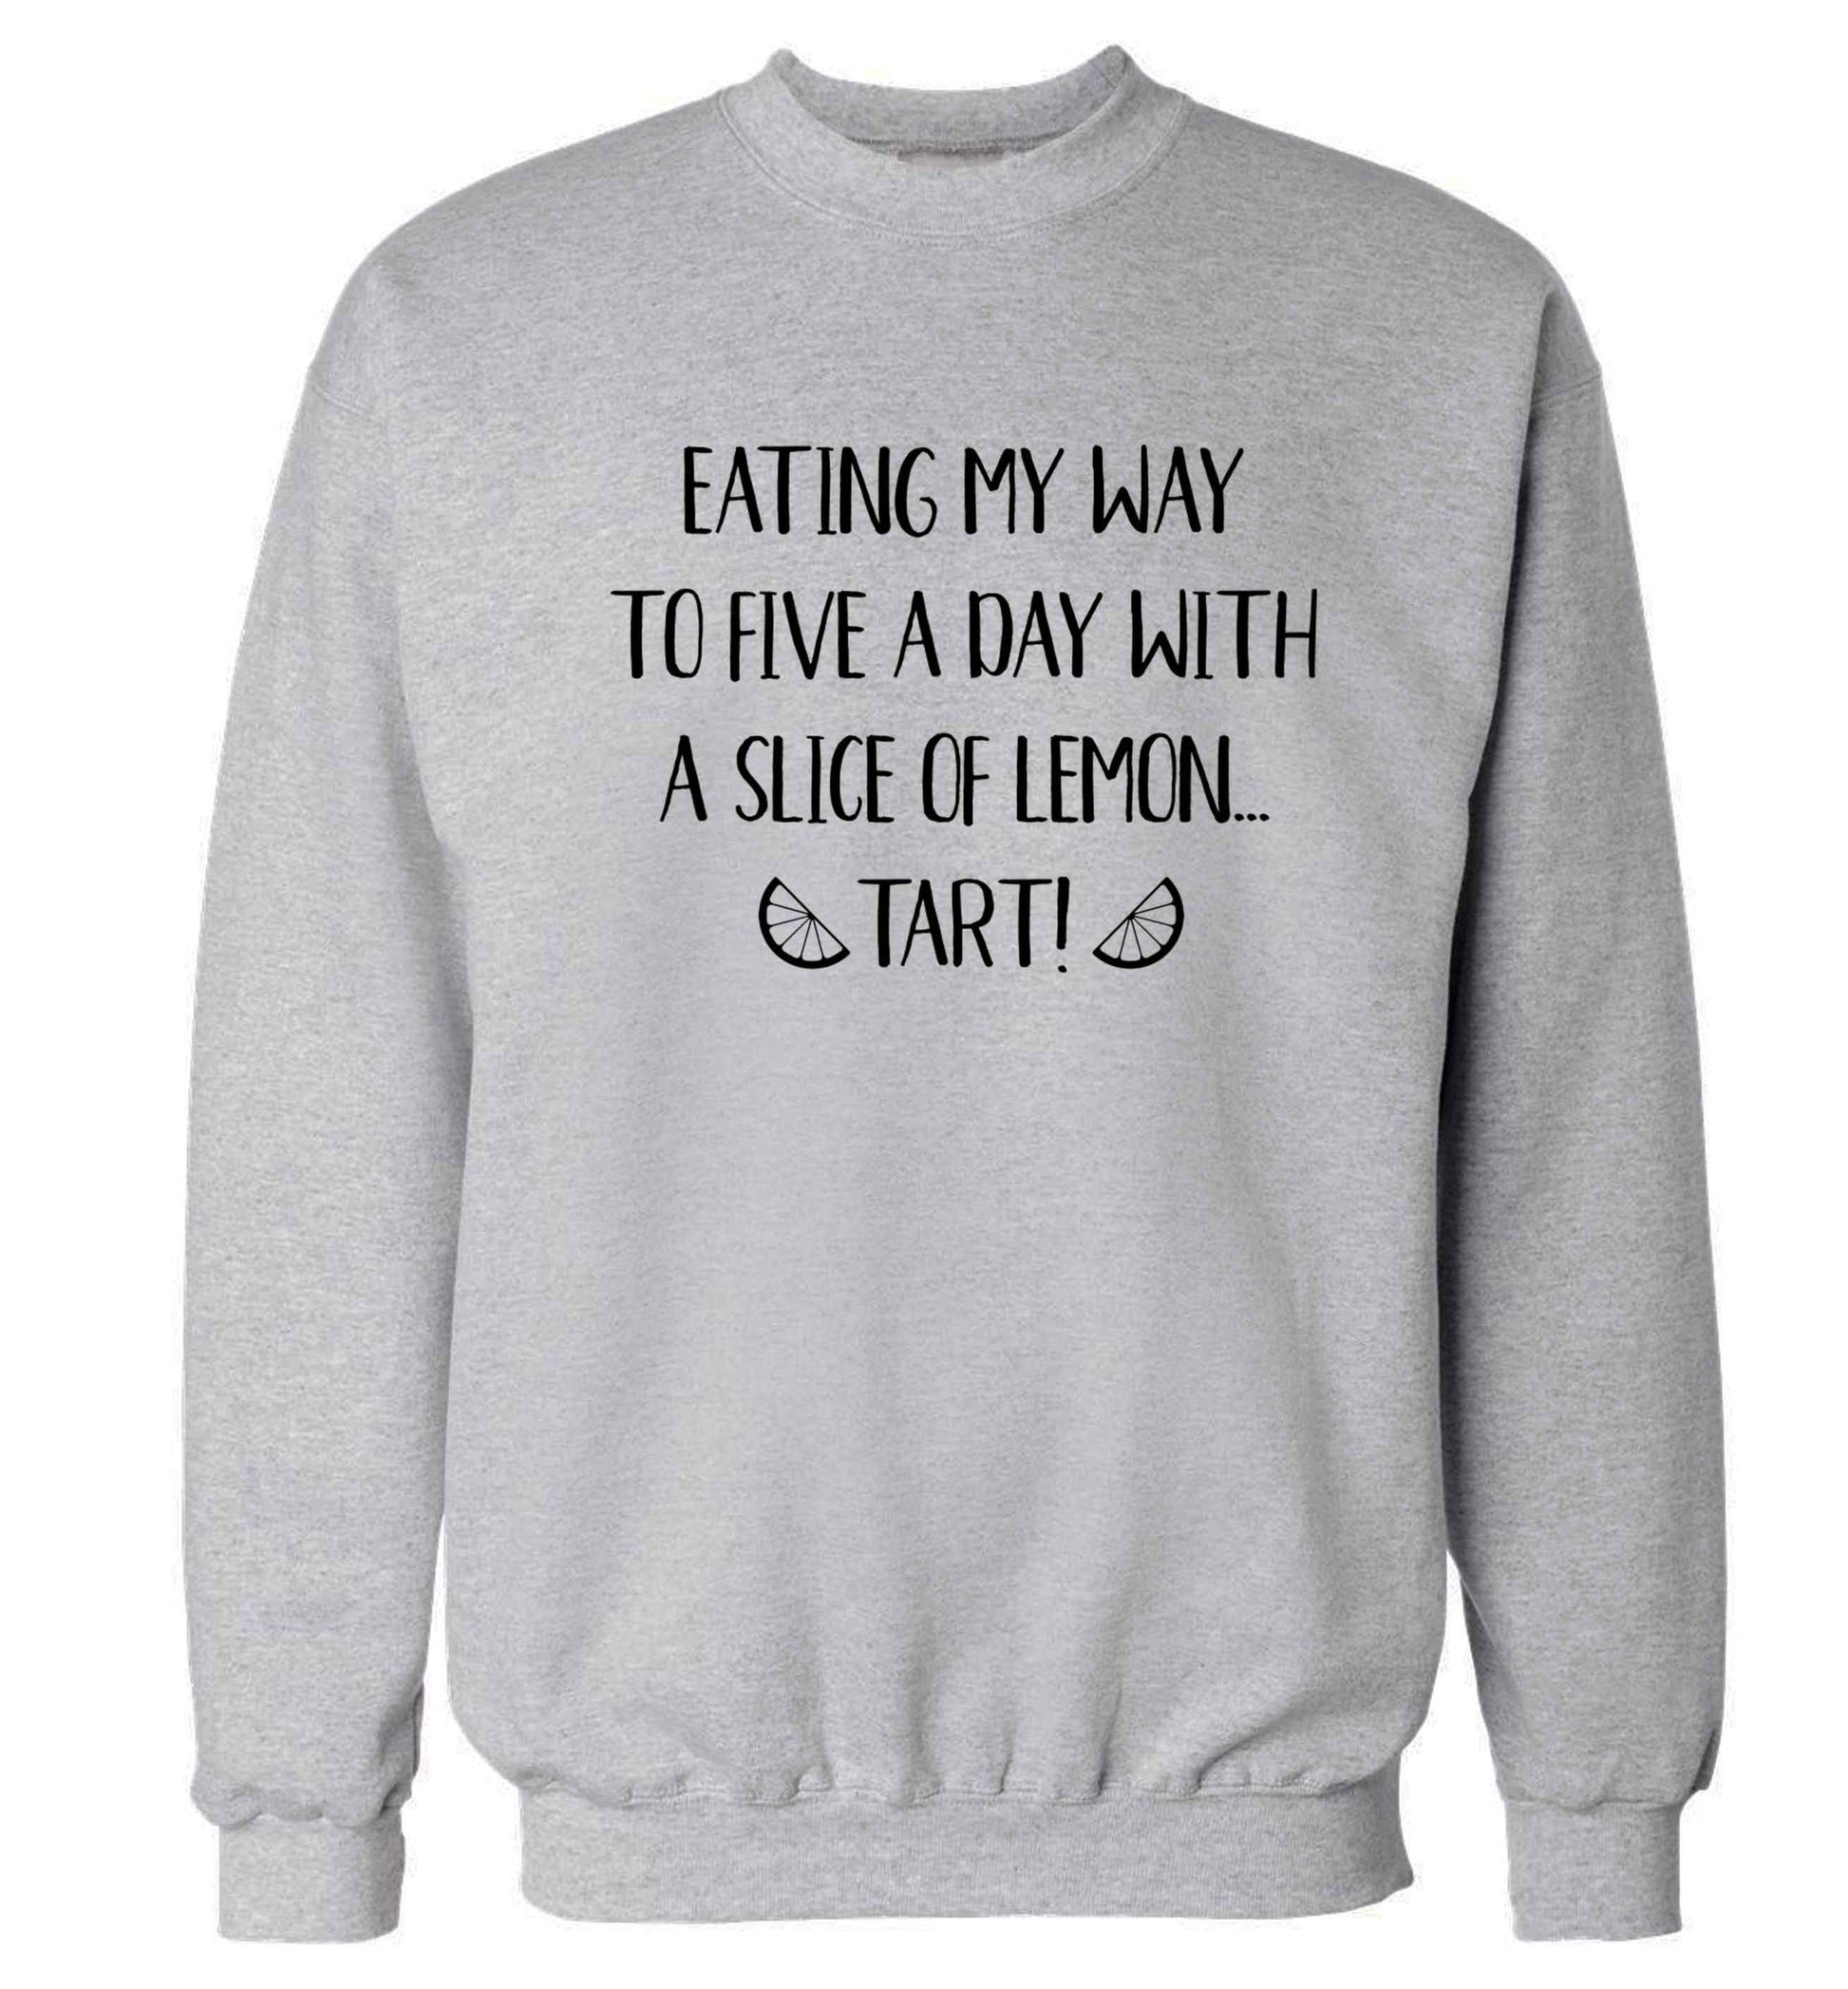 Eating my way to five a day with a slice of lemon tart Adult's unisex grey Sweater 2XL